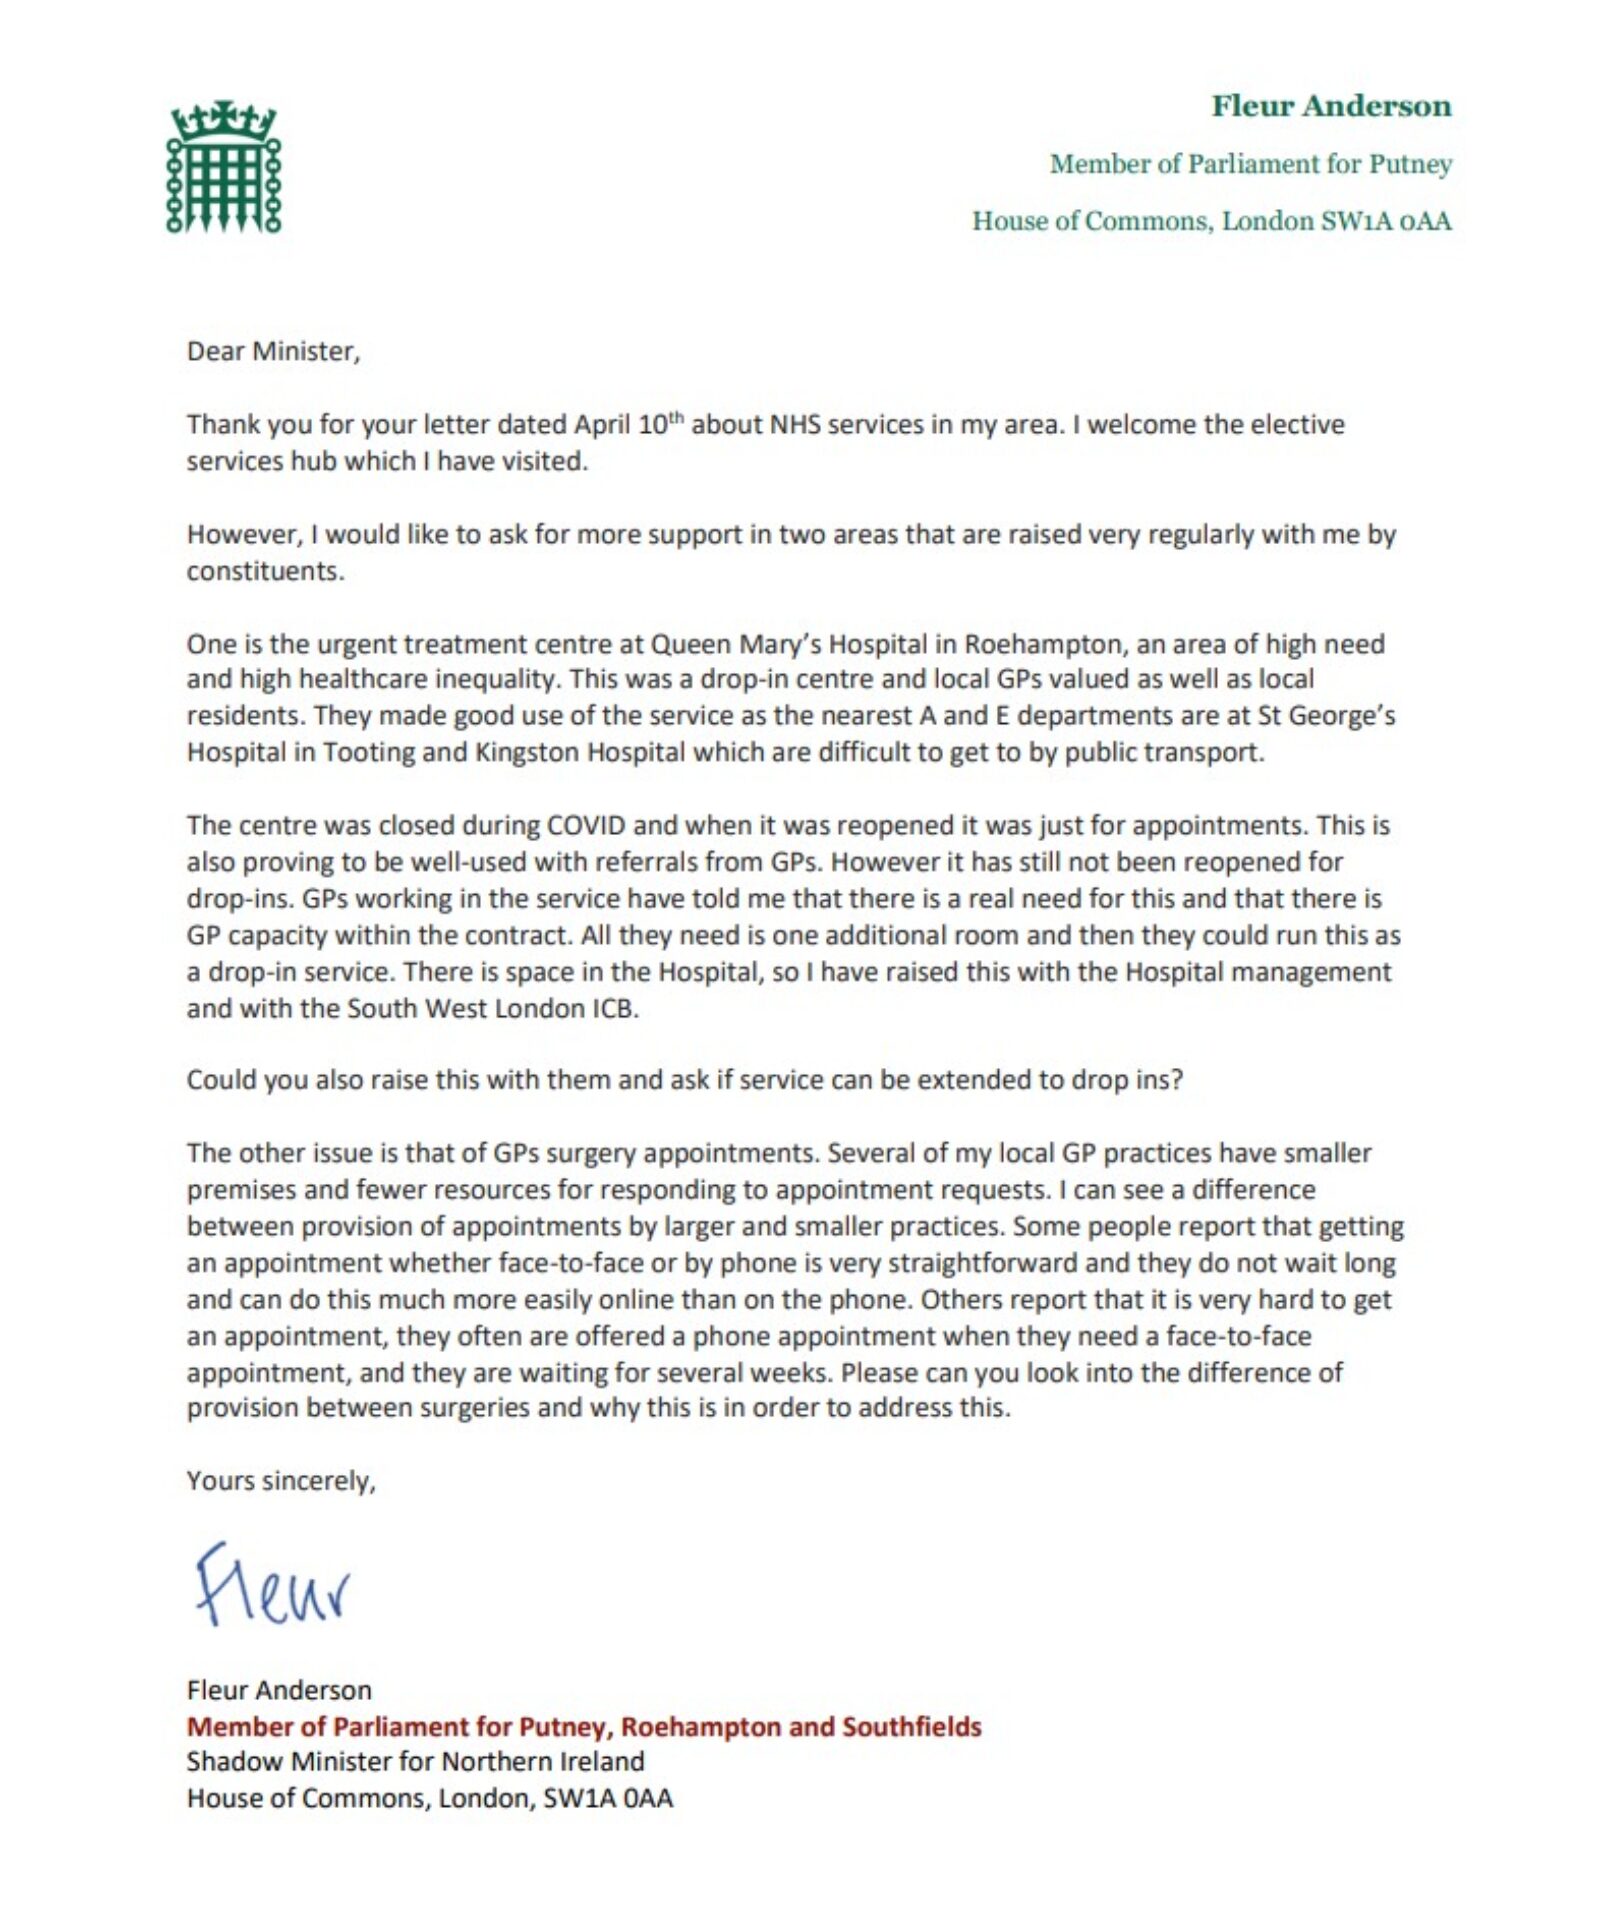 Letter to Minister on NHS services in Putney